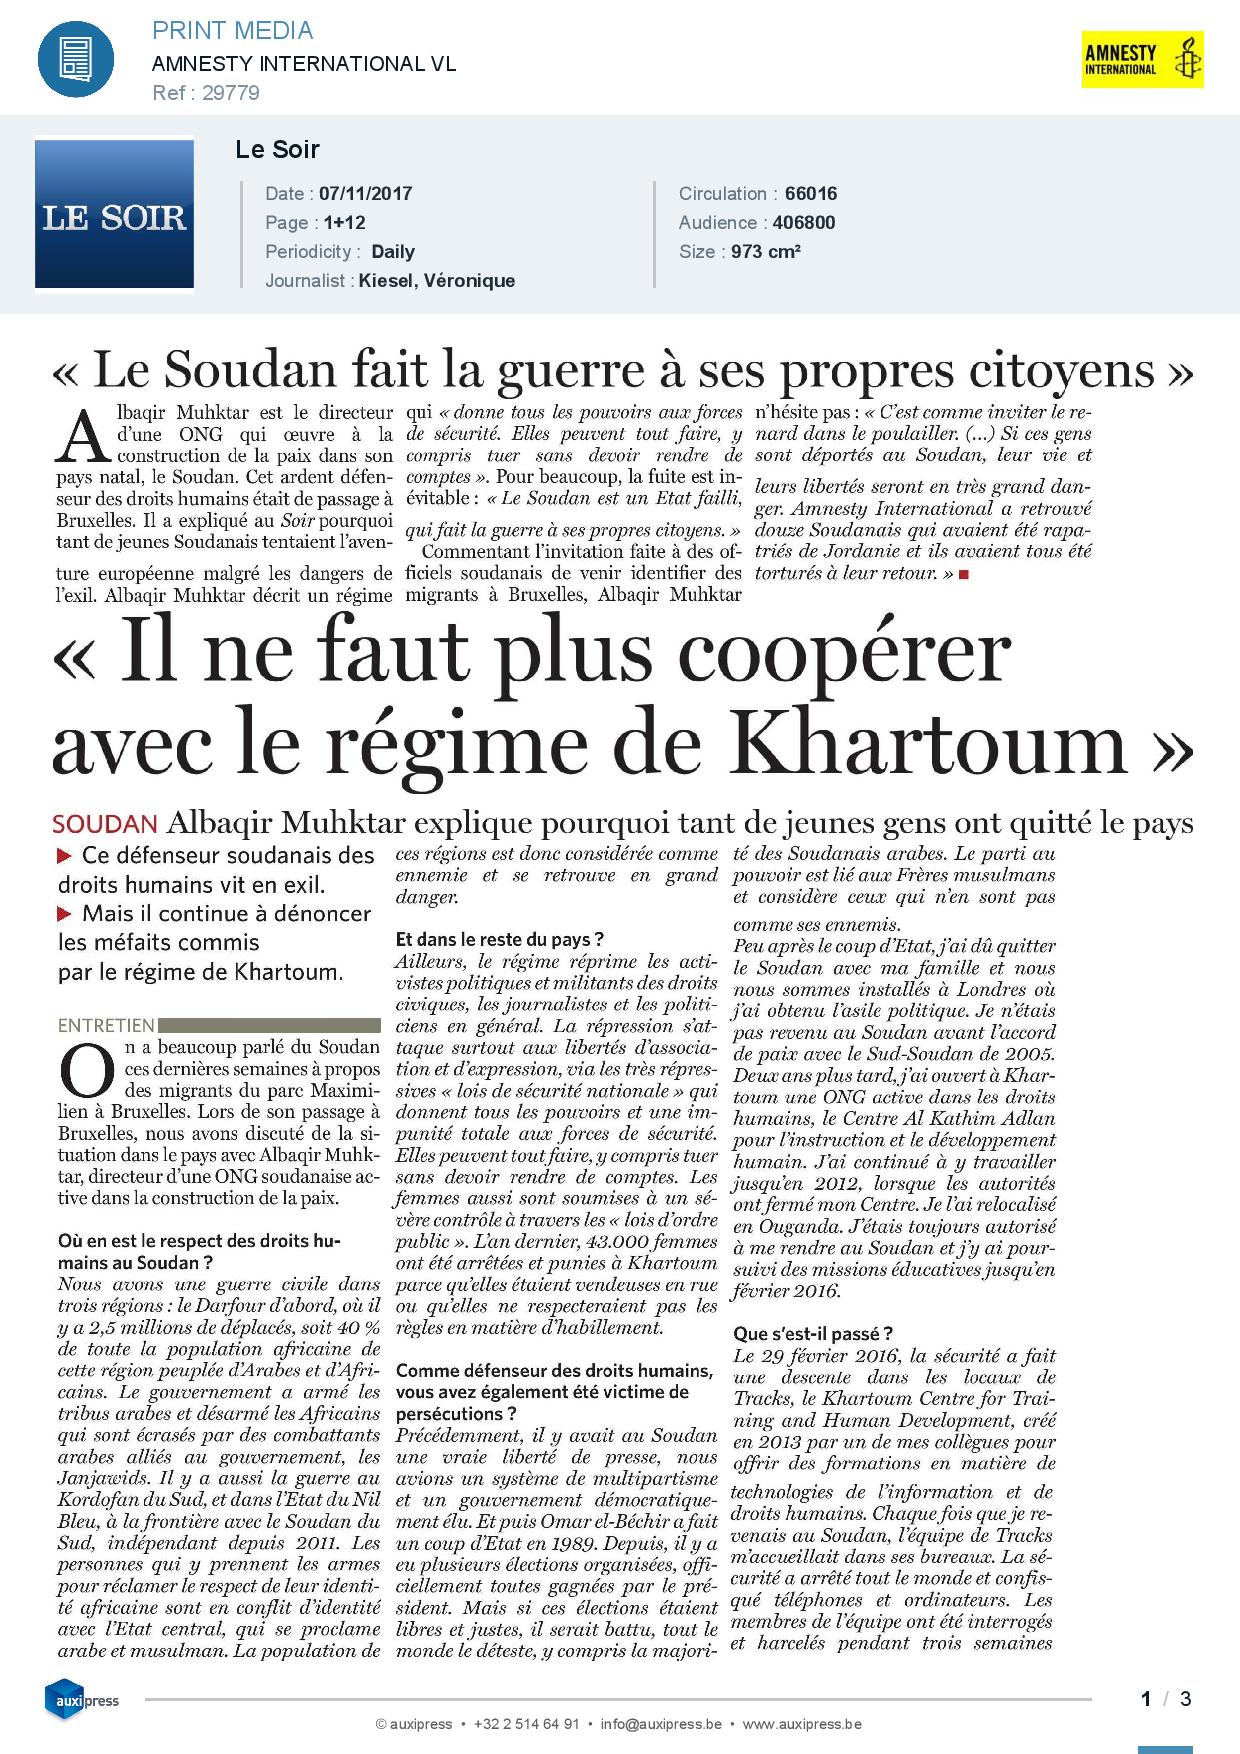 KACE Executive Director interviewed by French newspaper Le Soir